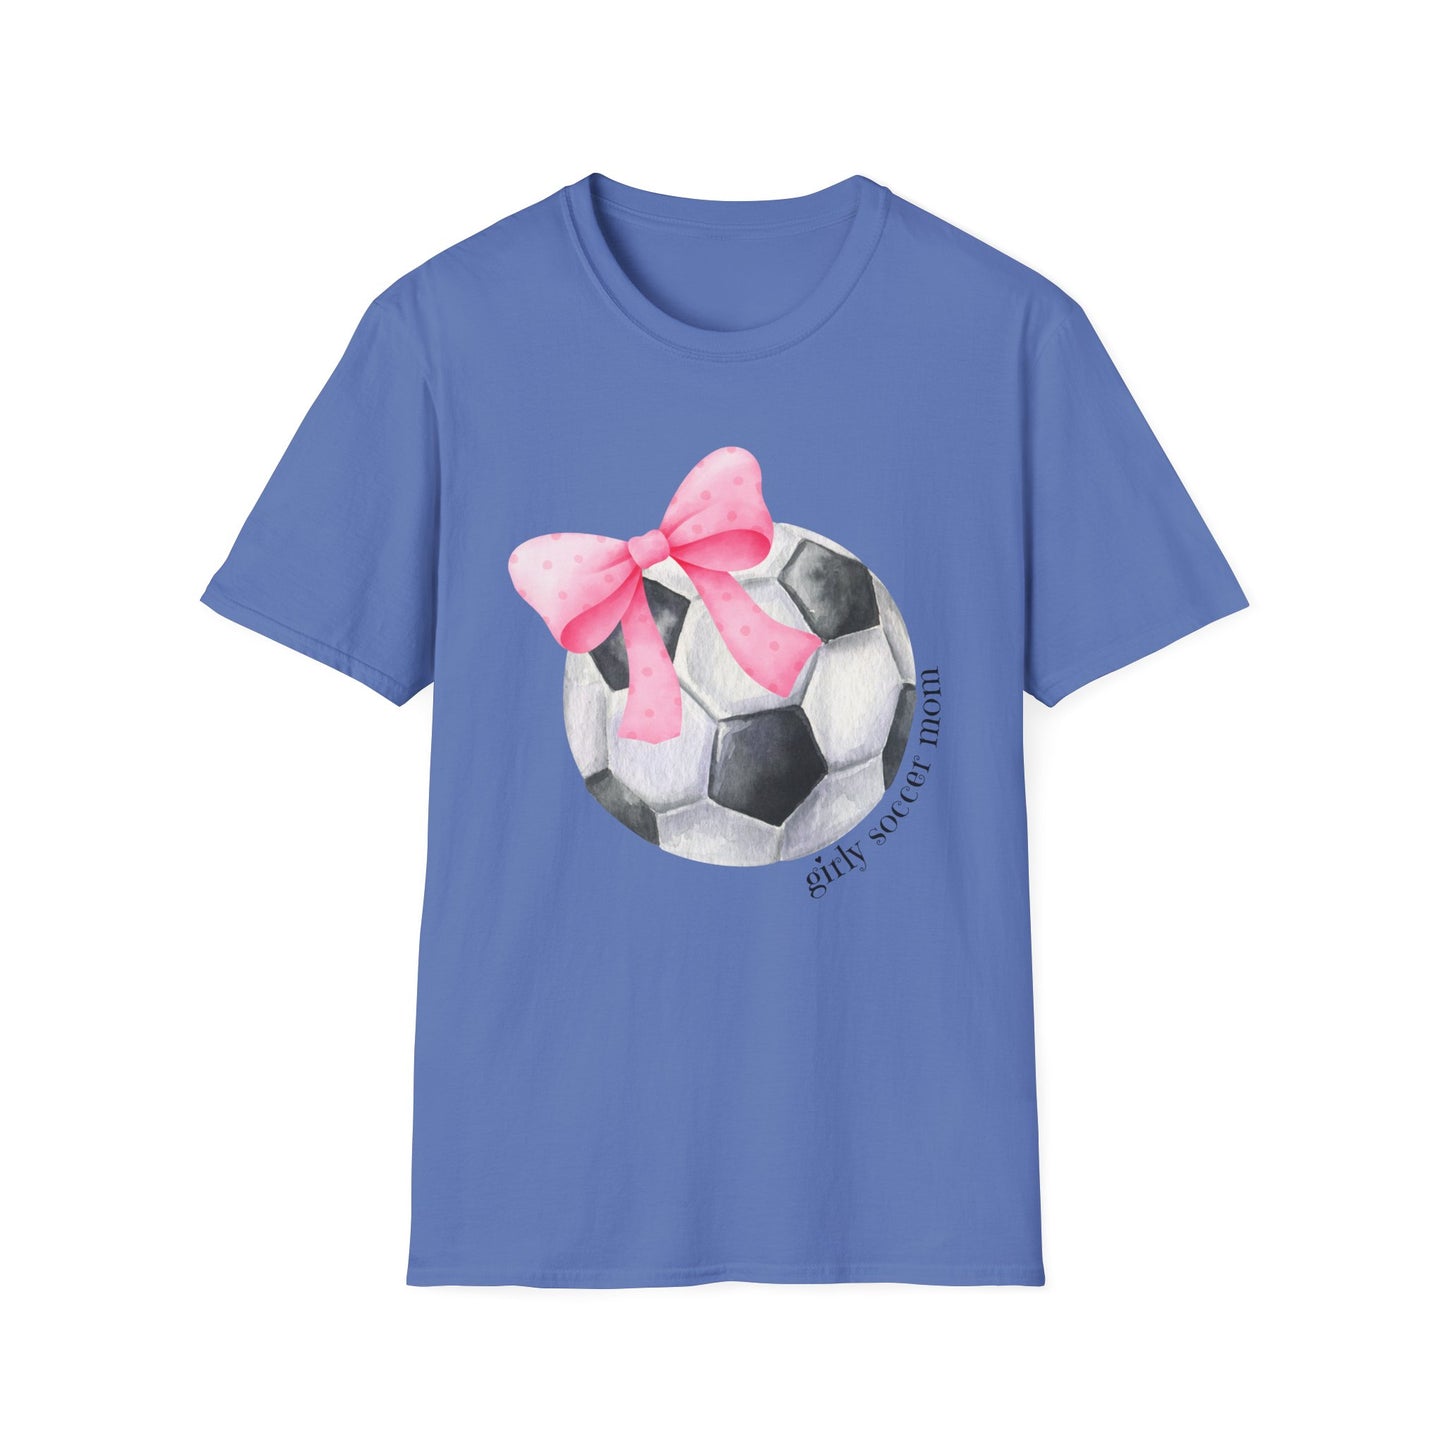 Coquette Girly Soccer Mom - Pink Watercolor Coquette Girly Designs - Unisex Softstyle T-Shirt